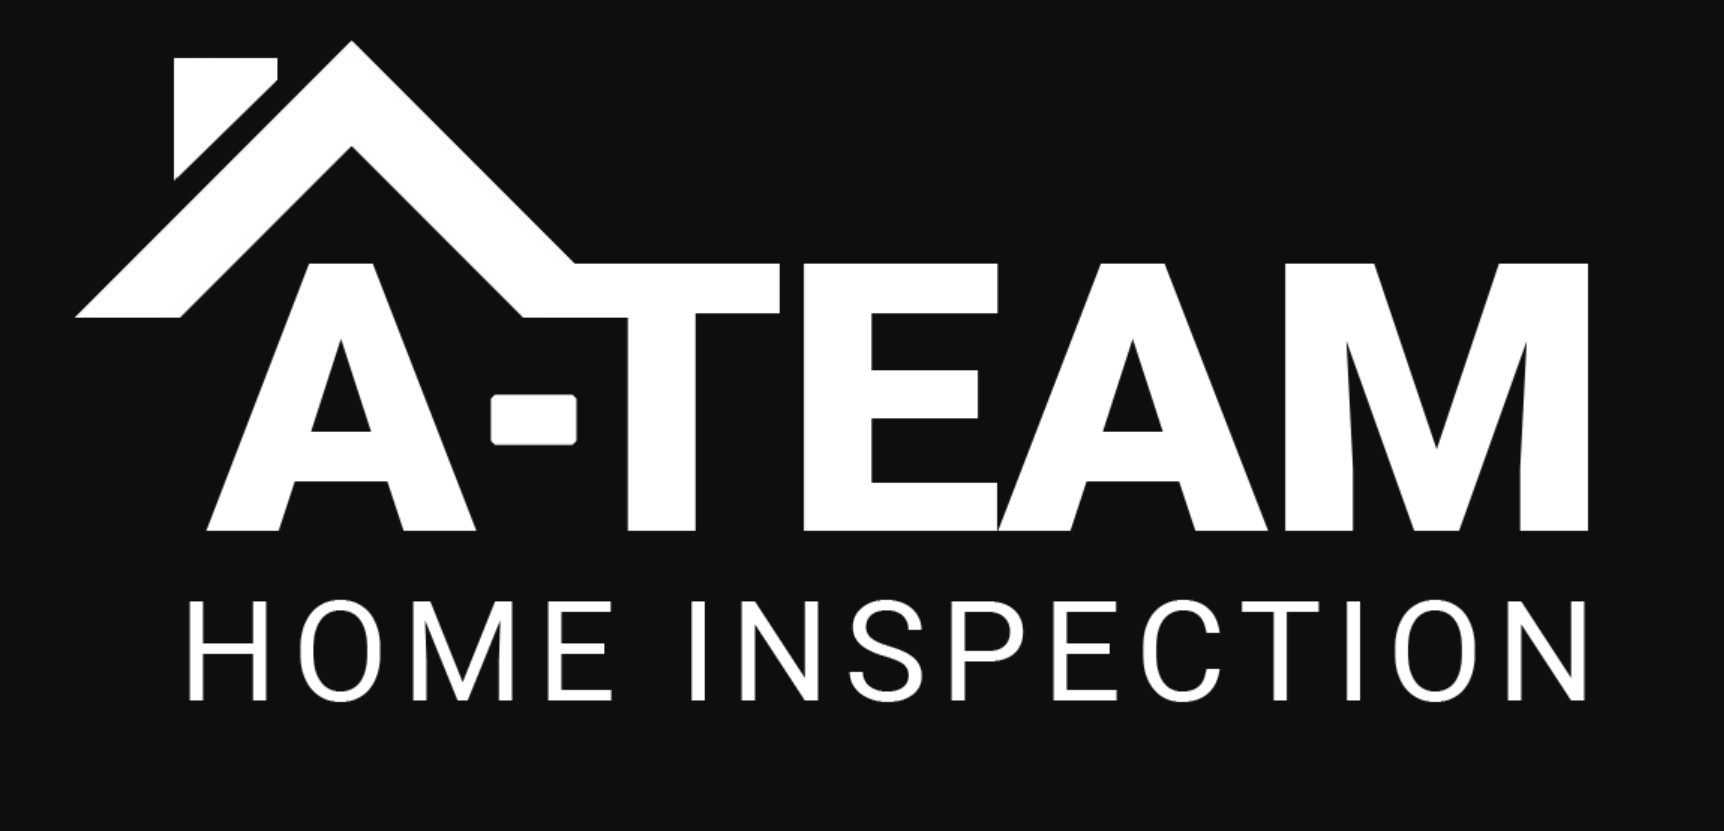 A-Team Home Inspection